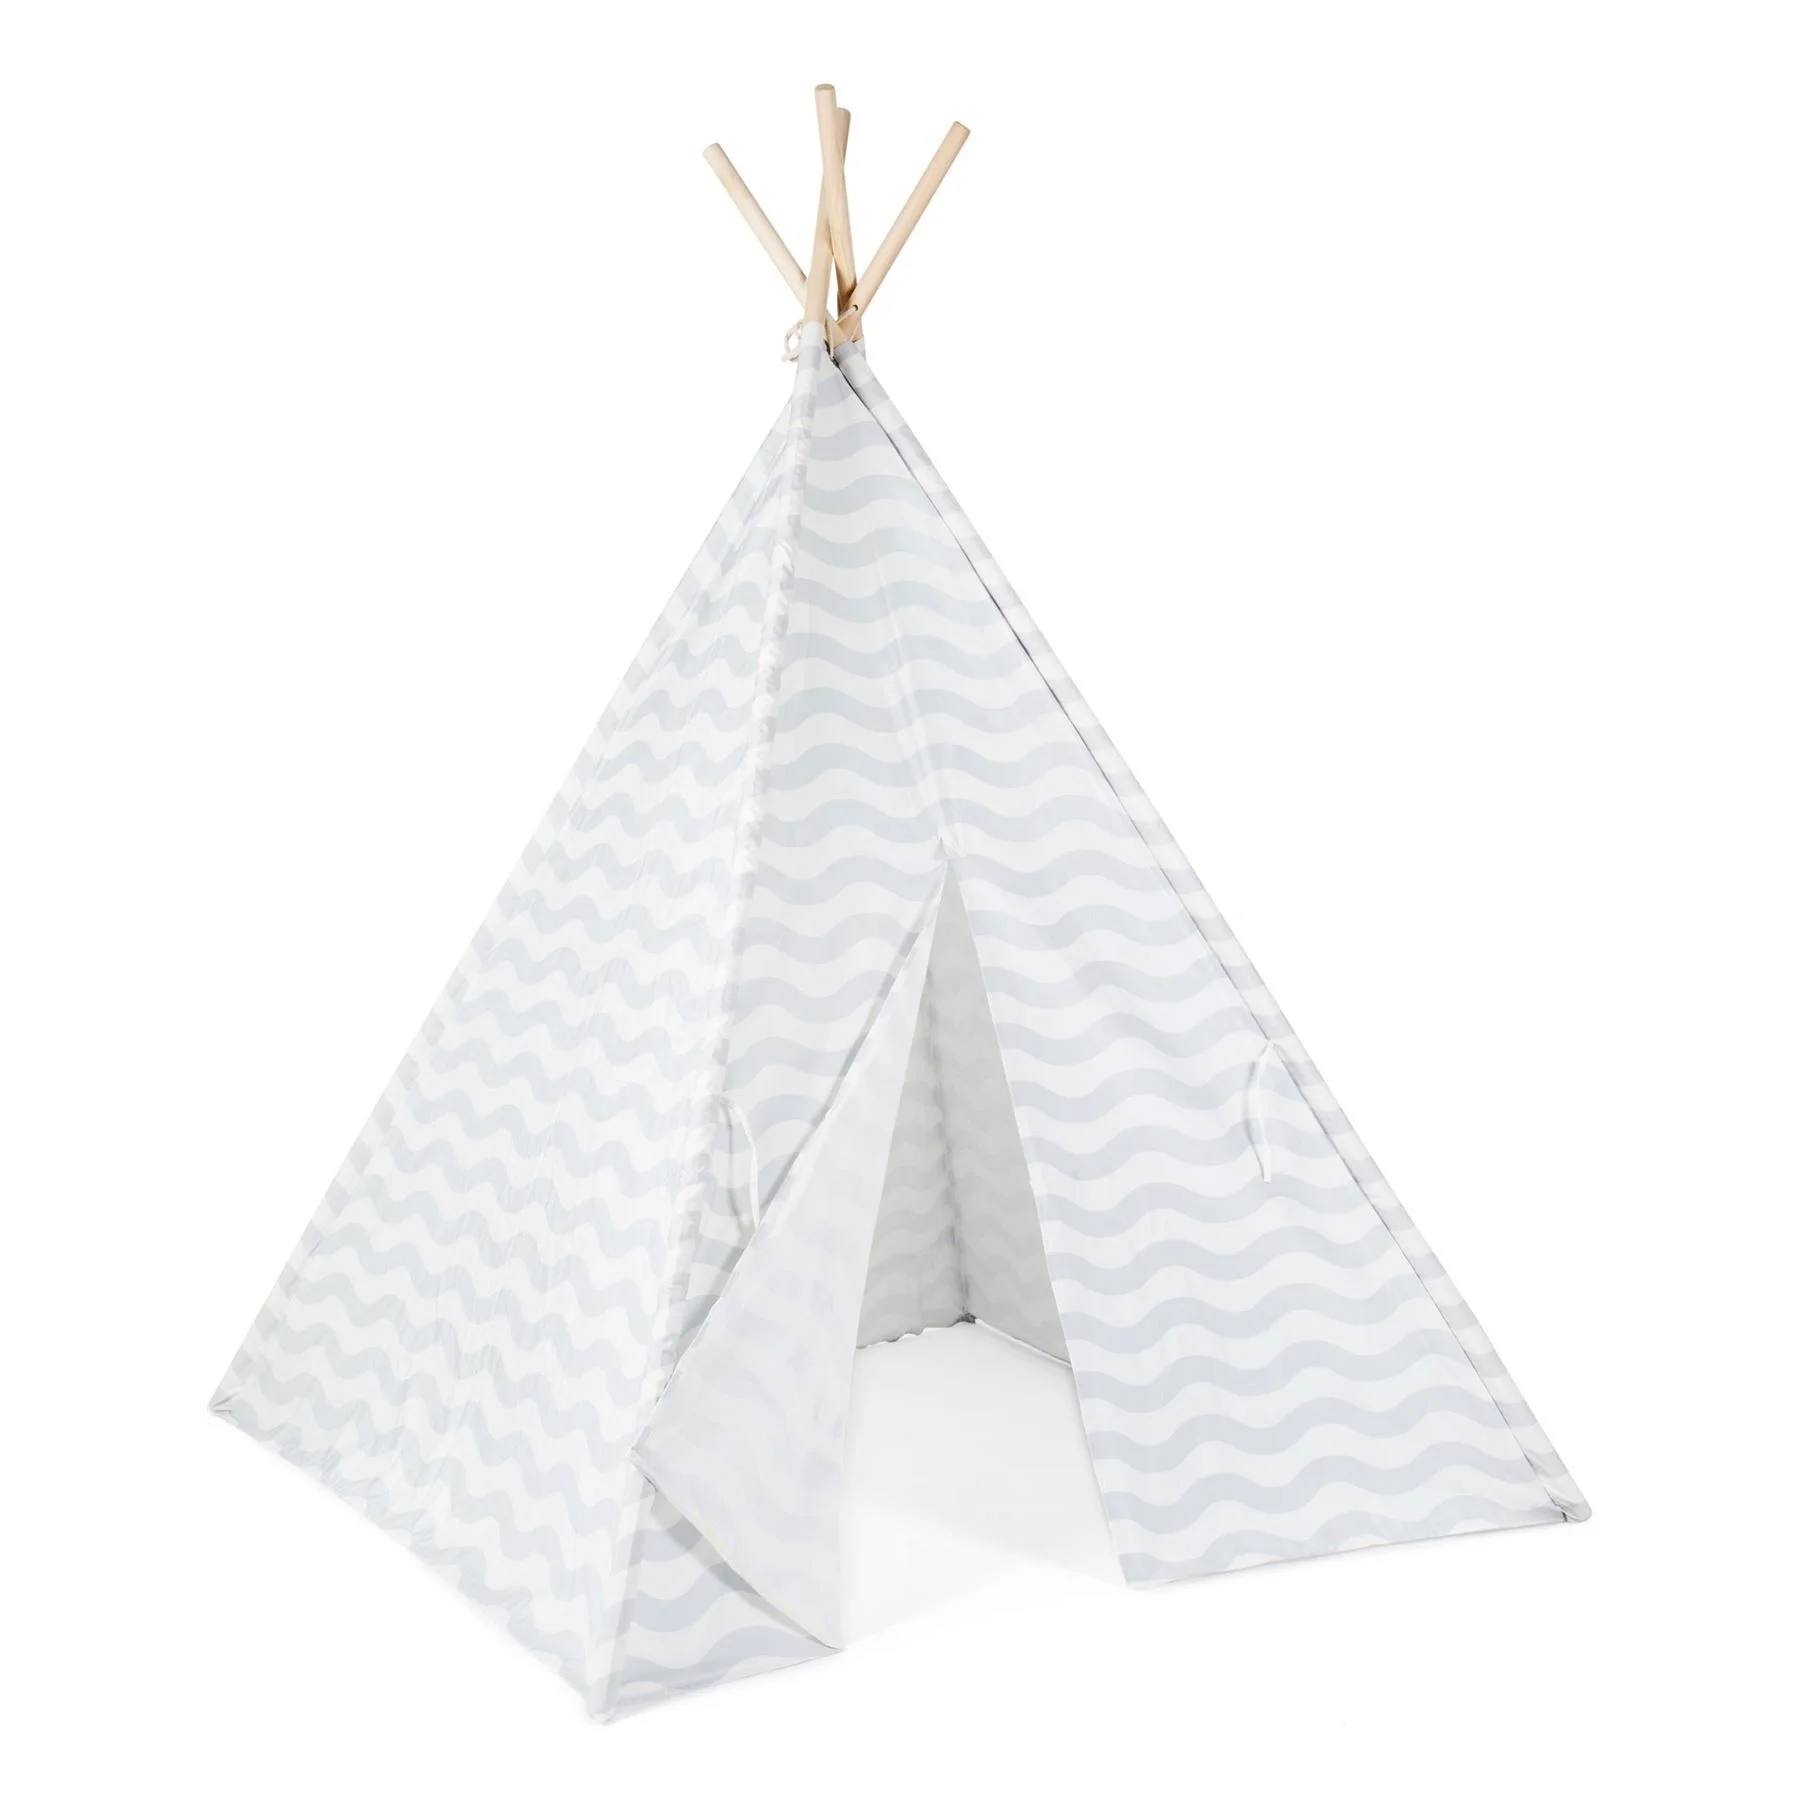 

Cotton Canvas Indoor Children Playhouse Kids Play Teepee Tent, Colorful